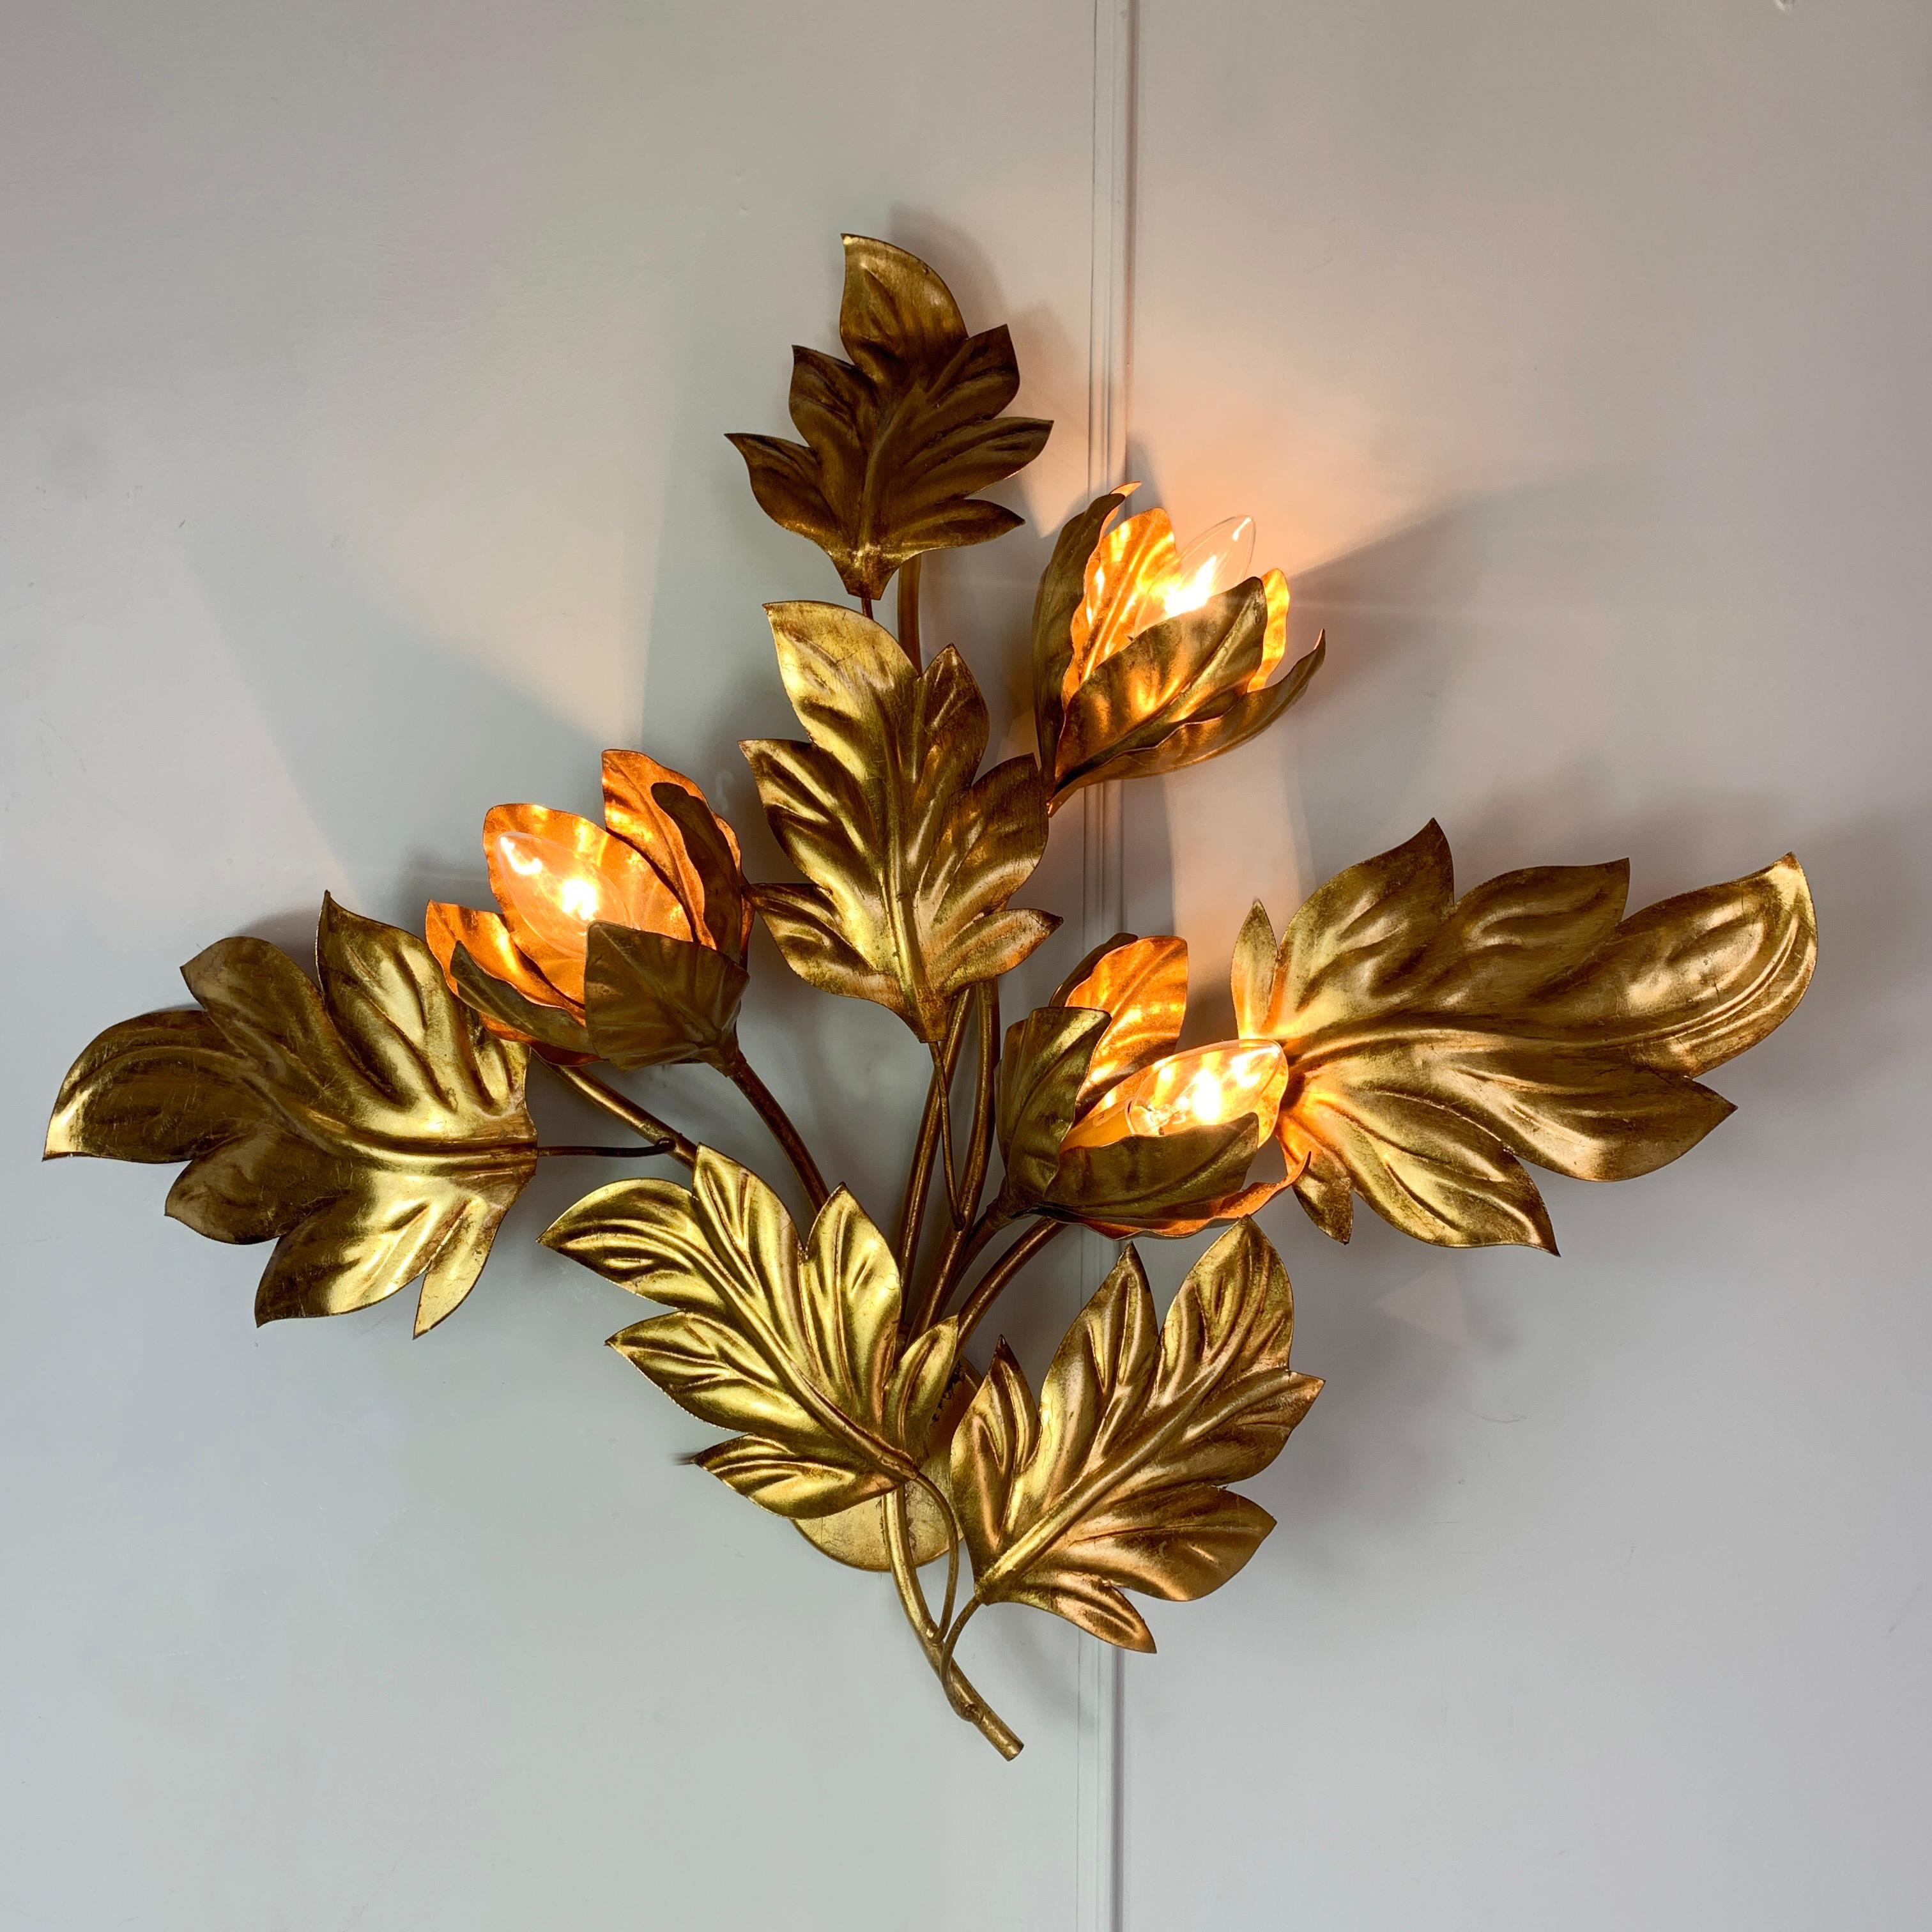 A beautiful 1970s' Hans Kogl wall light, large gilt leaves surround the three flower buds that house the lamp holders. This is a rare Hans Kogl design, and is in excellent vintage condition, fully rewired and pat tested.

Dimensions: 75cm width x